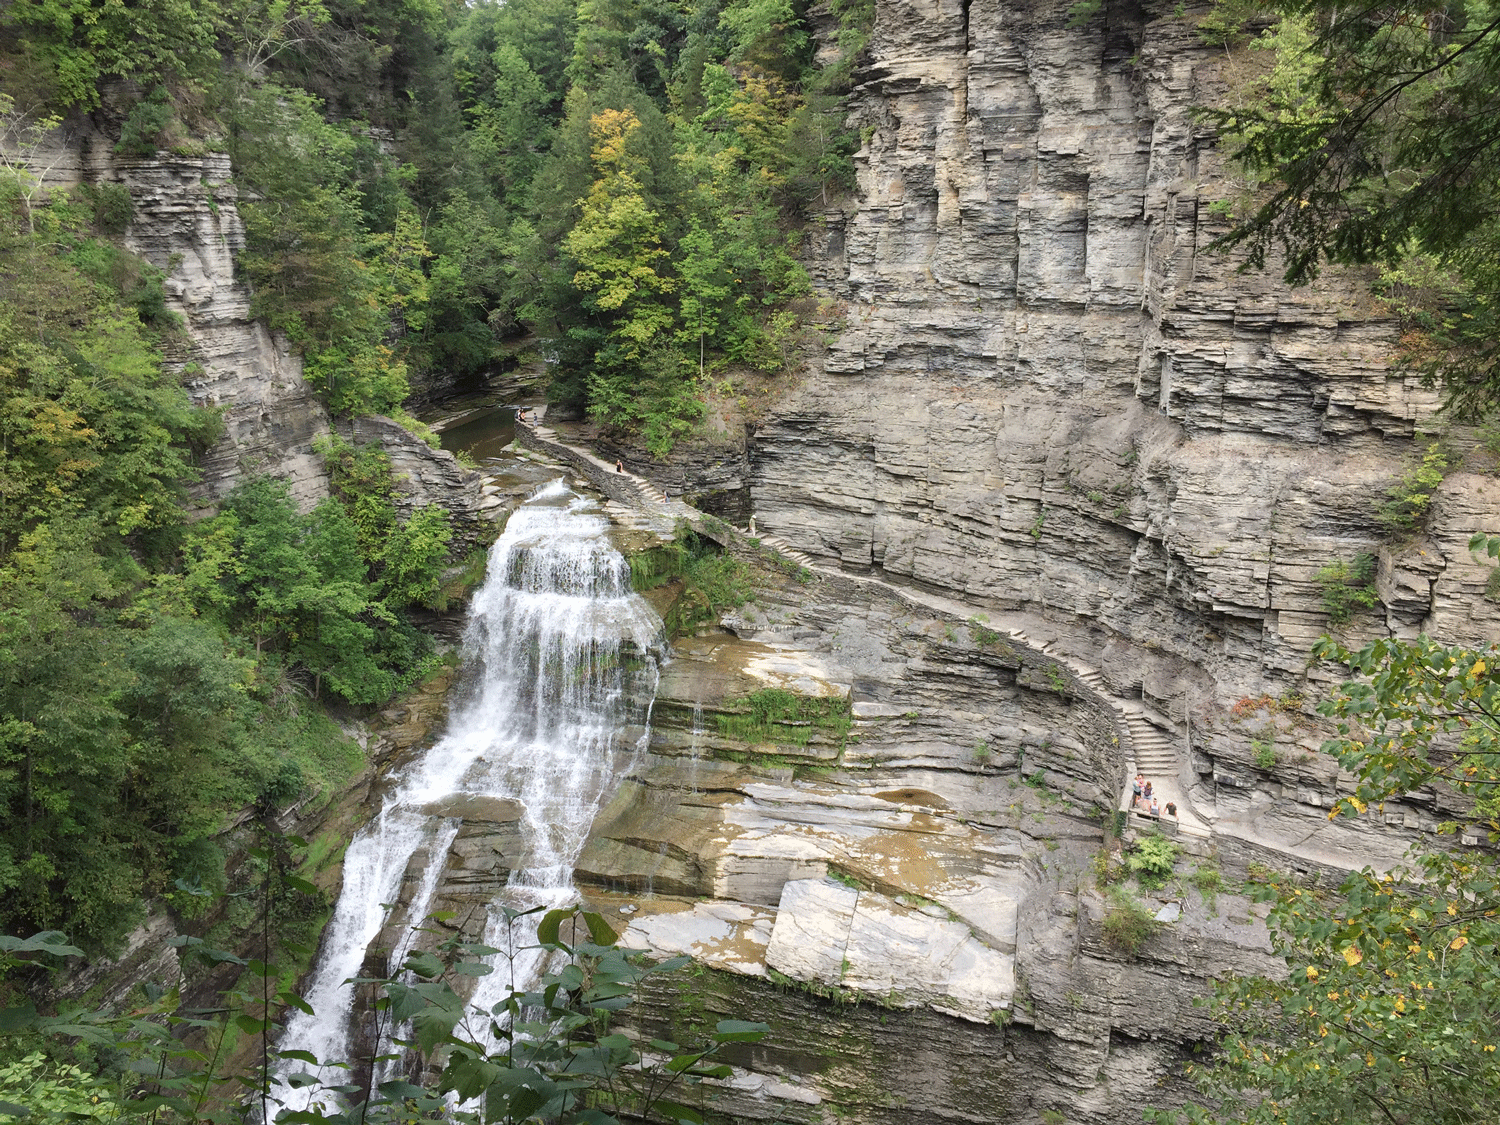 Lucifer Falls at Robert H. Treman State Park, Ithaca, New York (note people for scale). The sequence of rocks shown in this photograph (Devonian Sonyea Group) may represent about 1,000,000 years of geological time.